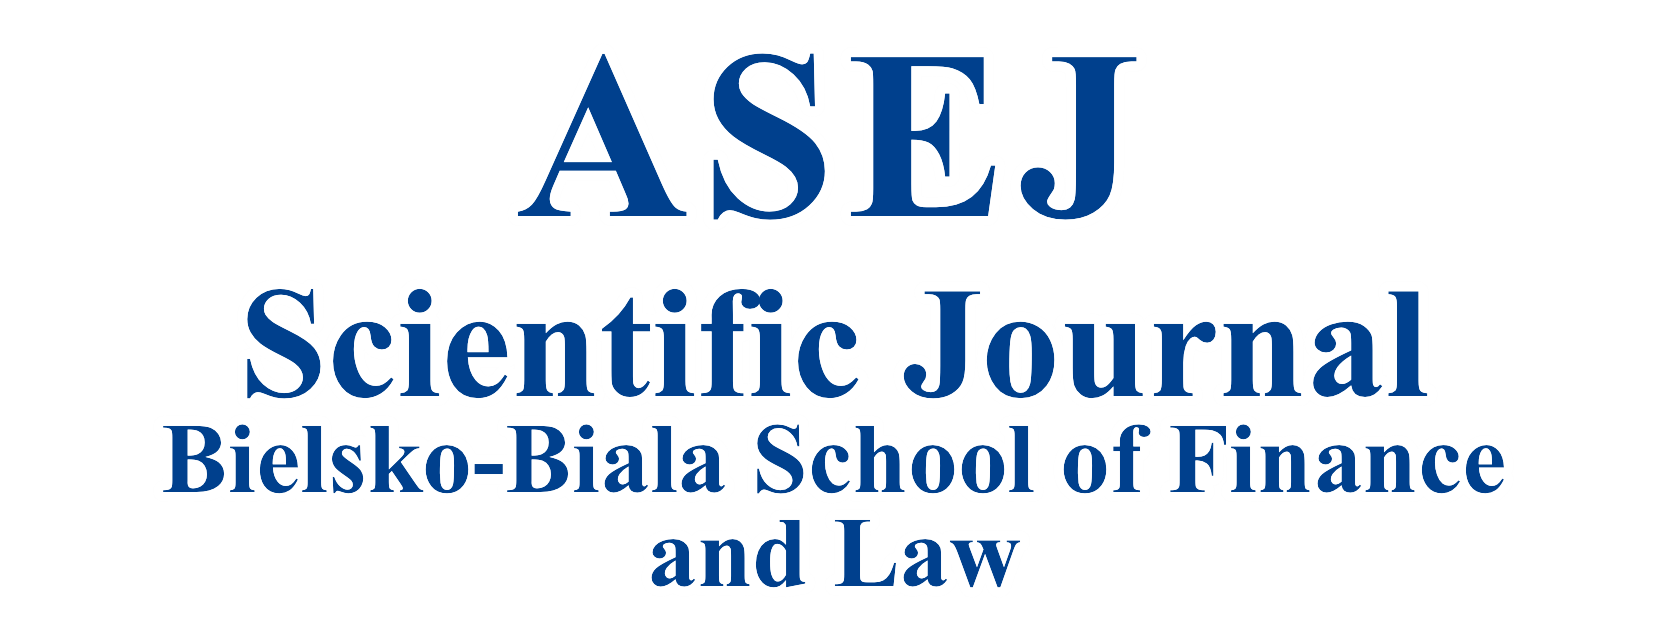 Logo of the ASEJ Scientific Journal of Bieslko-Biala School of Finanace and Law